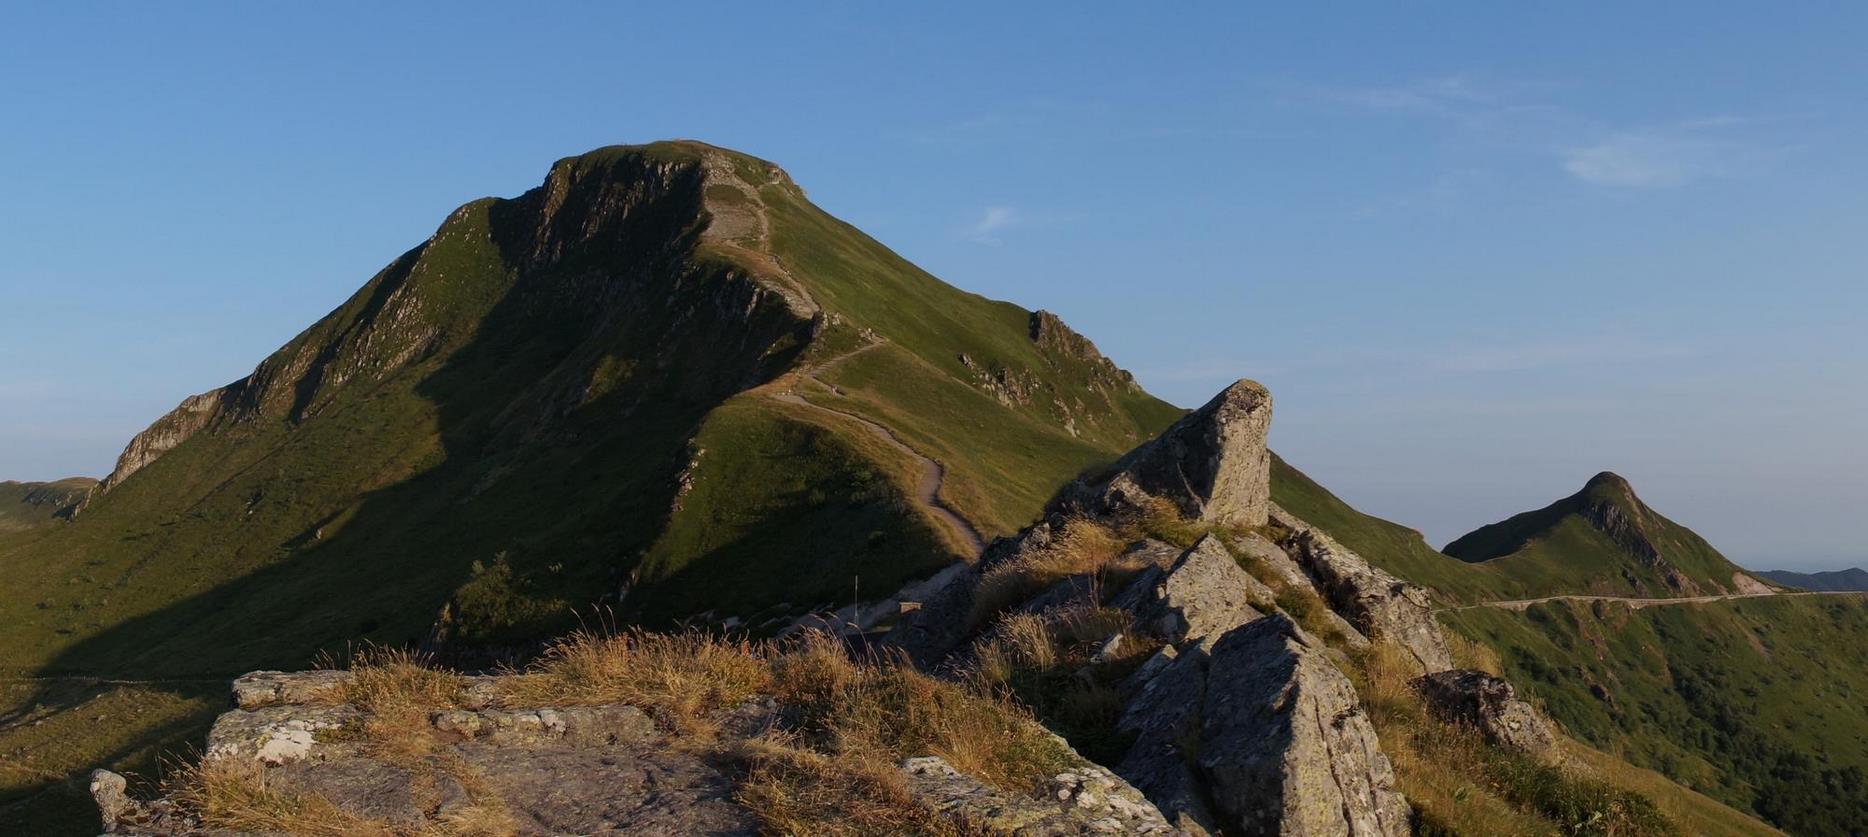 The Monts du Cantal - climb to Puy Mary